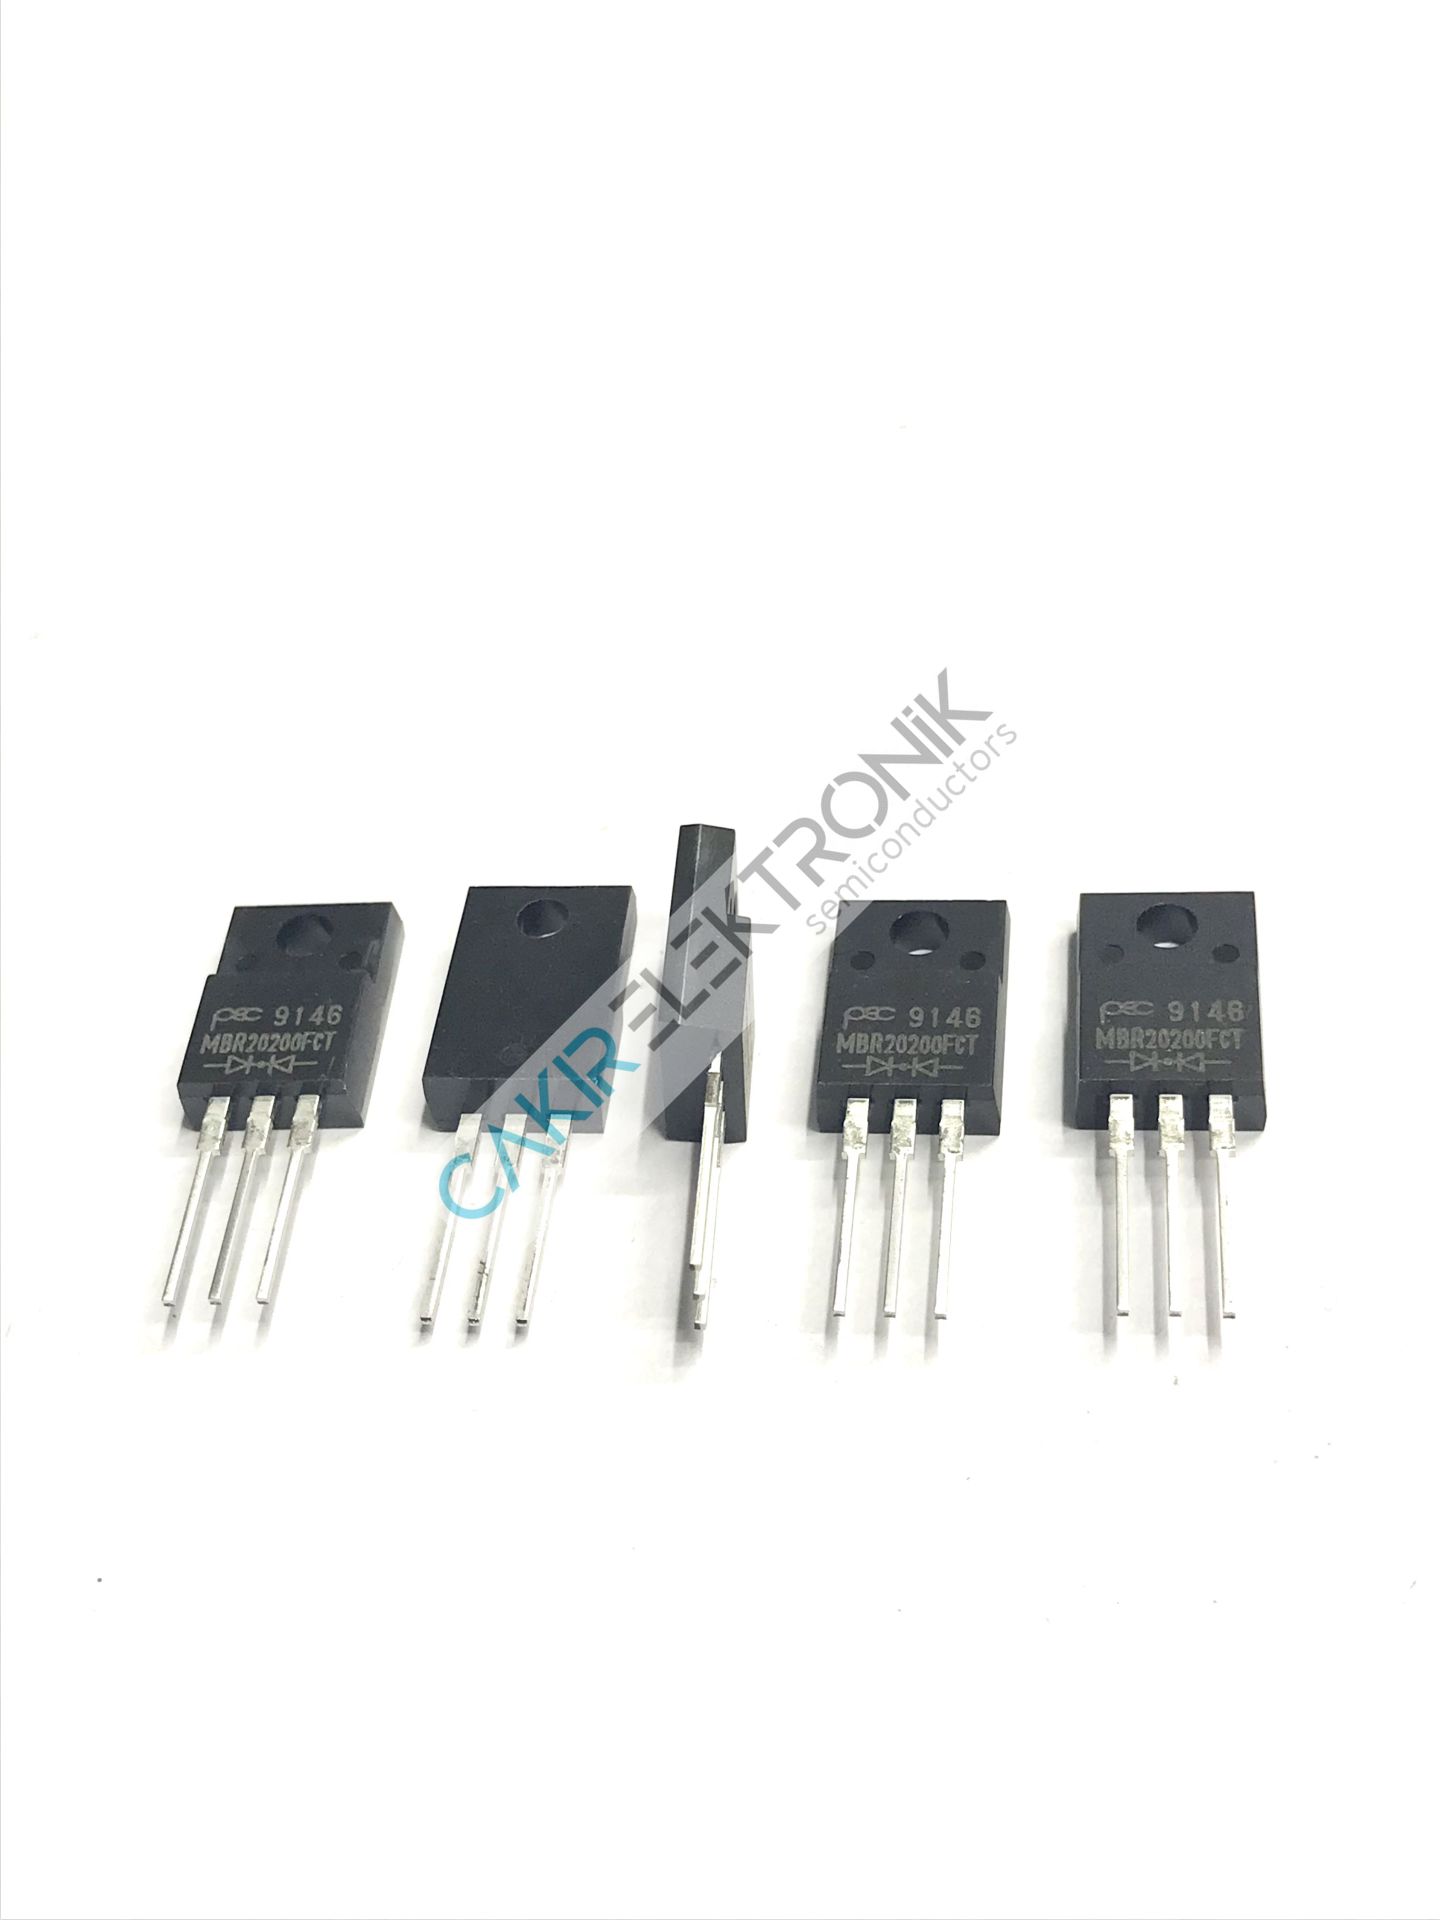 MBR20200FCT - MBR20200CT - MBR20200F -M 20A. 200V. SCHOTTKY BARRIER RECTIFIERS